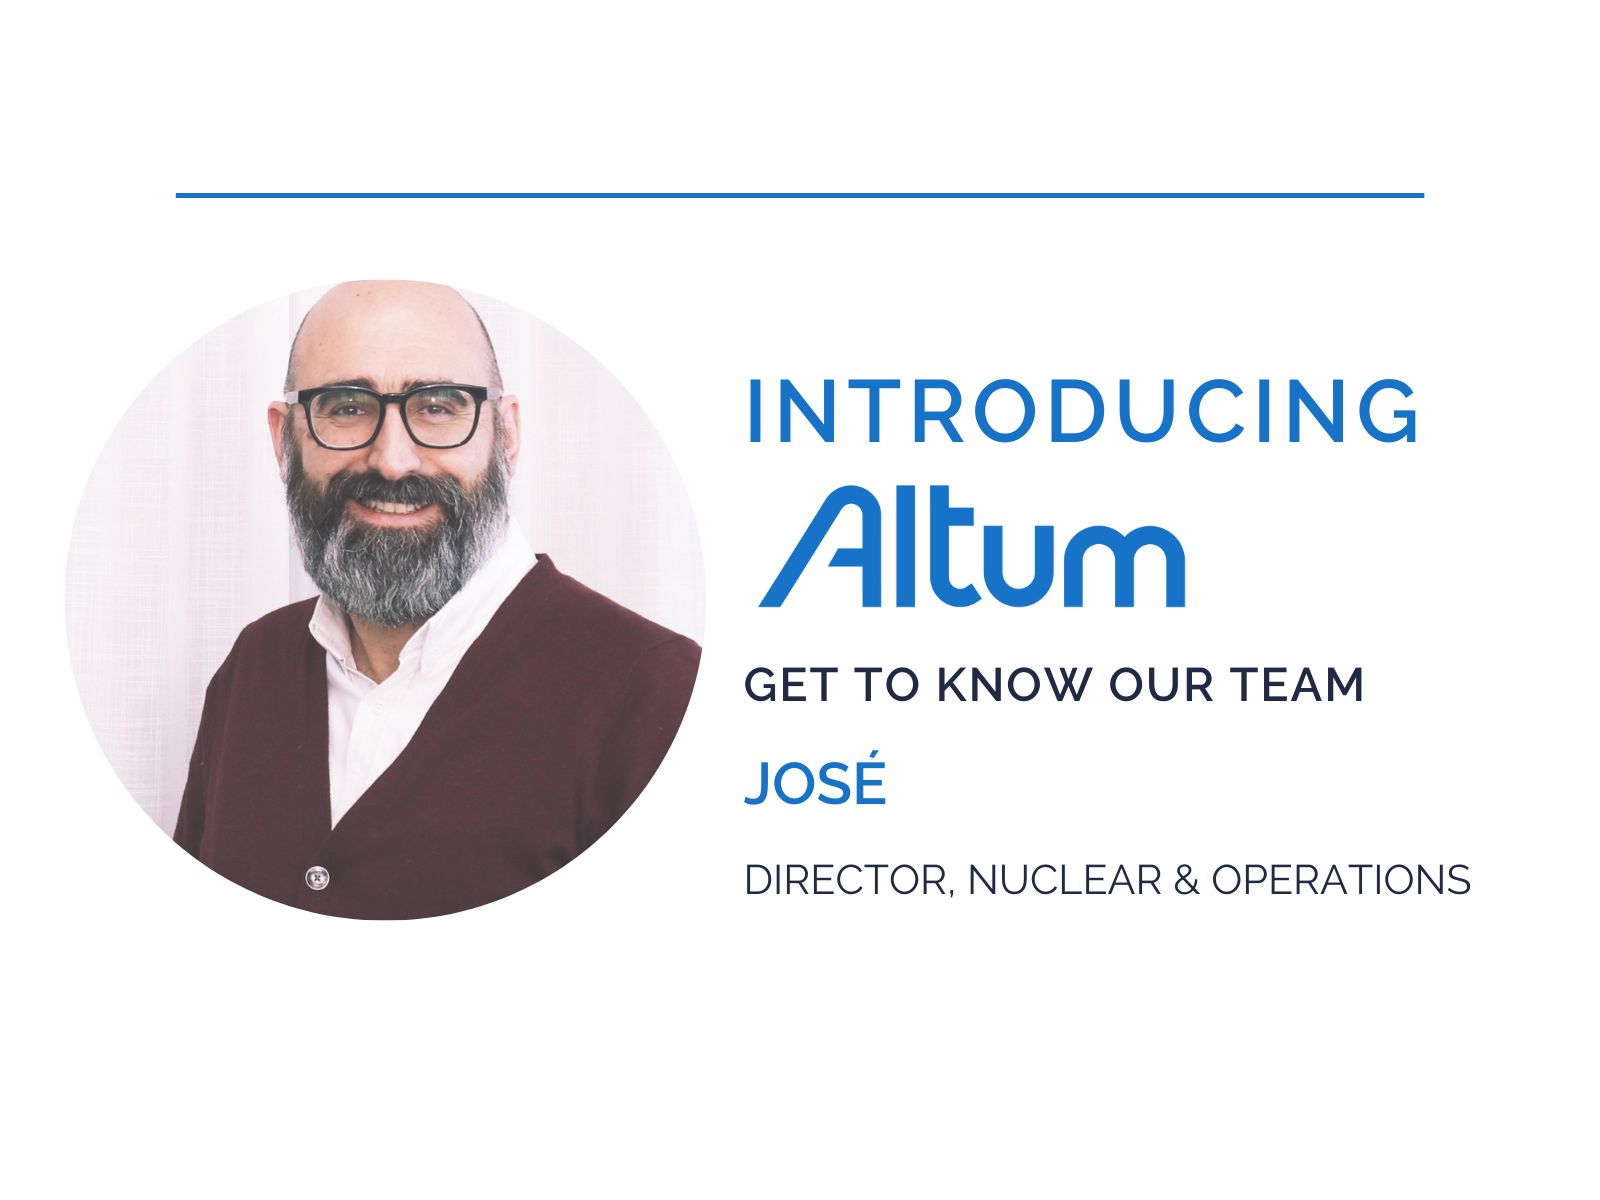 Introducing Altum: José, Director of Nuclear and Operations